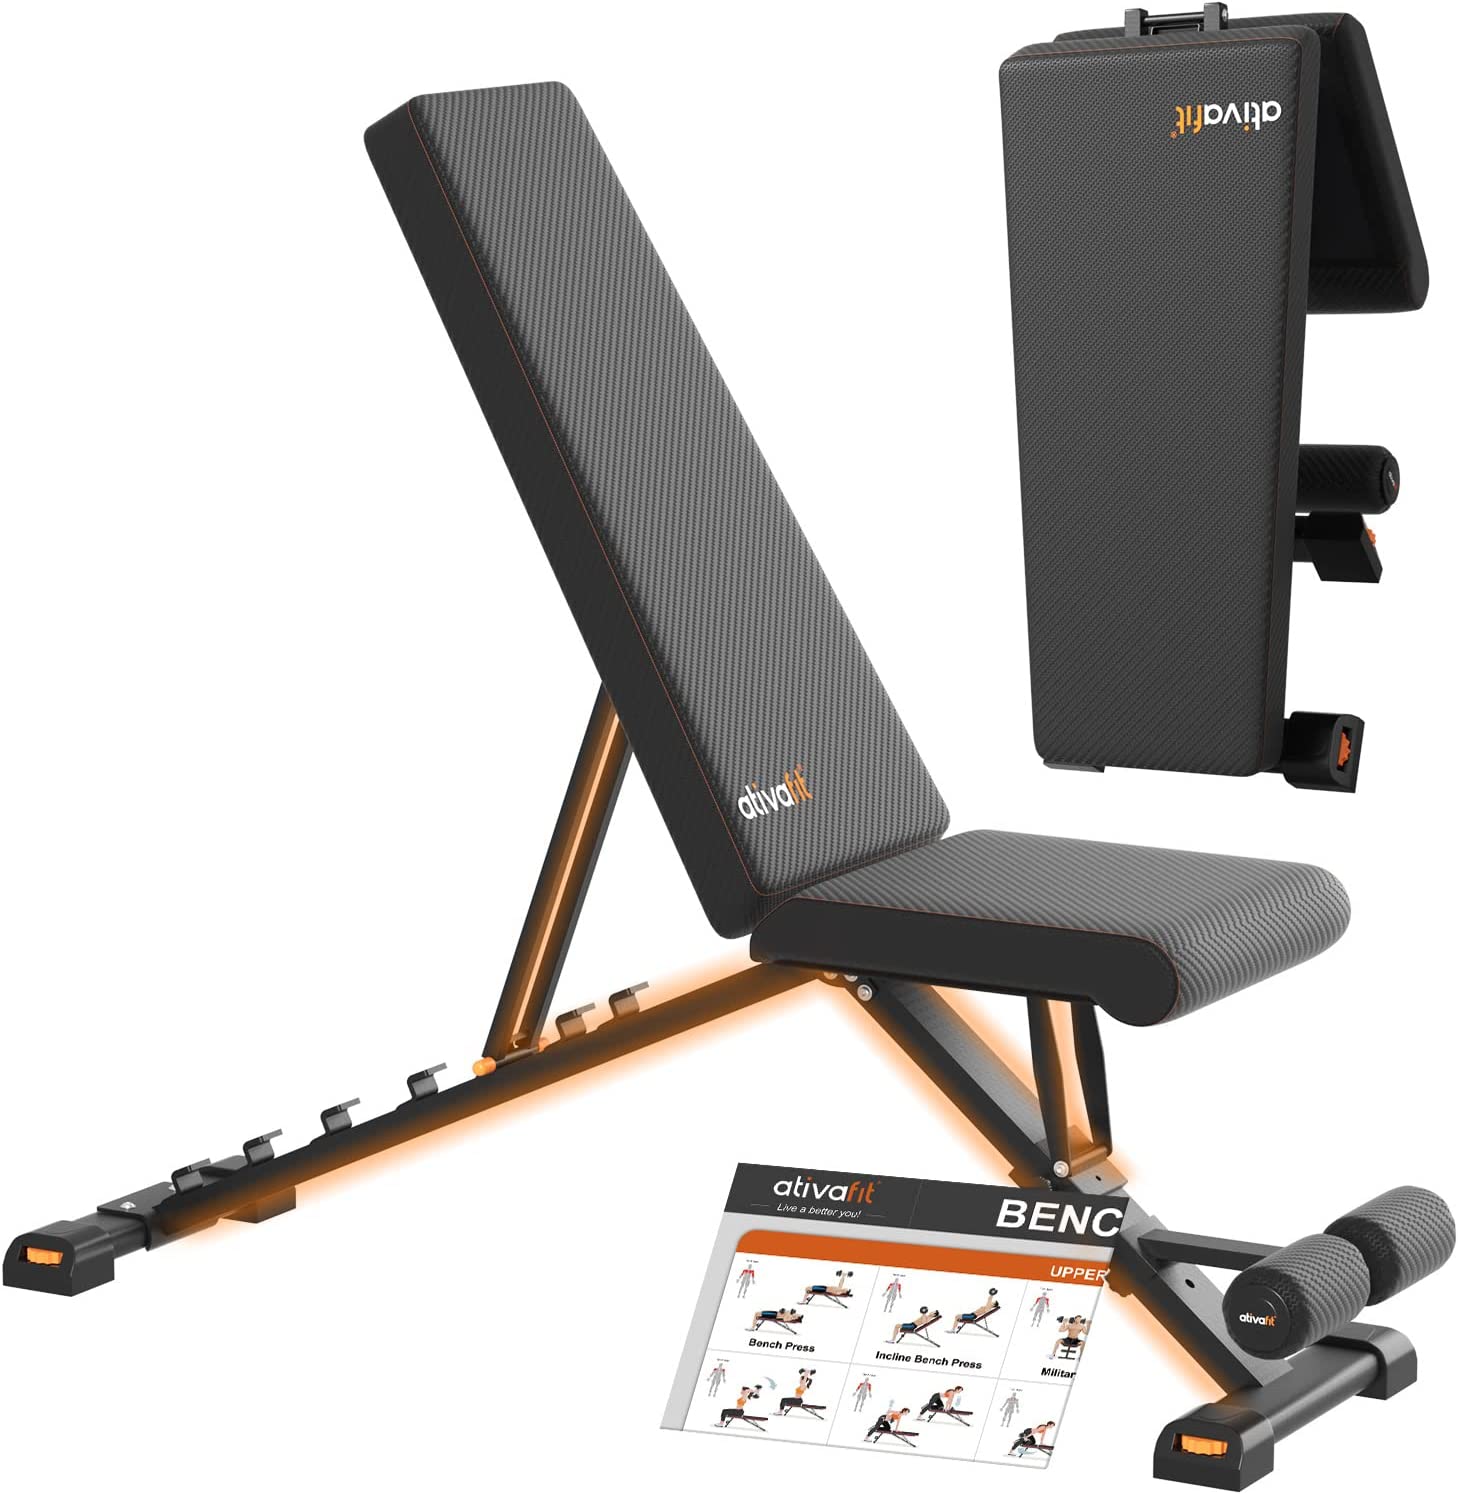 Ativafit Adjustable Weight Bench (800-lbs Capacity) $70 + Free Shipping